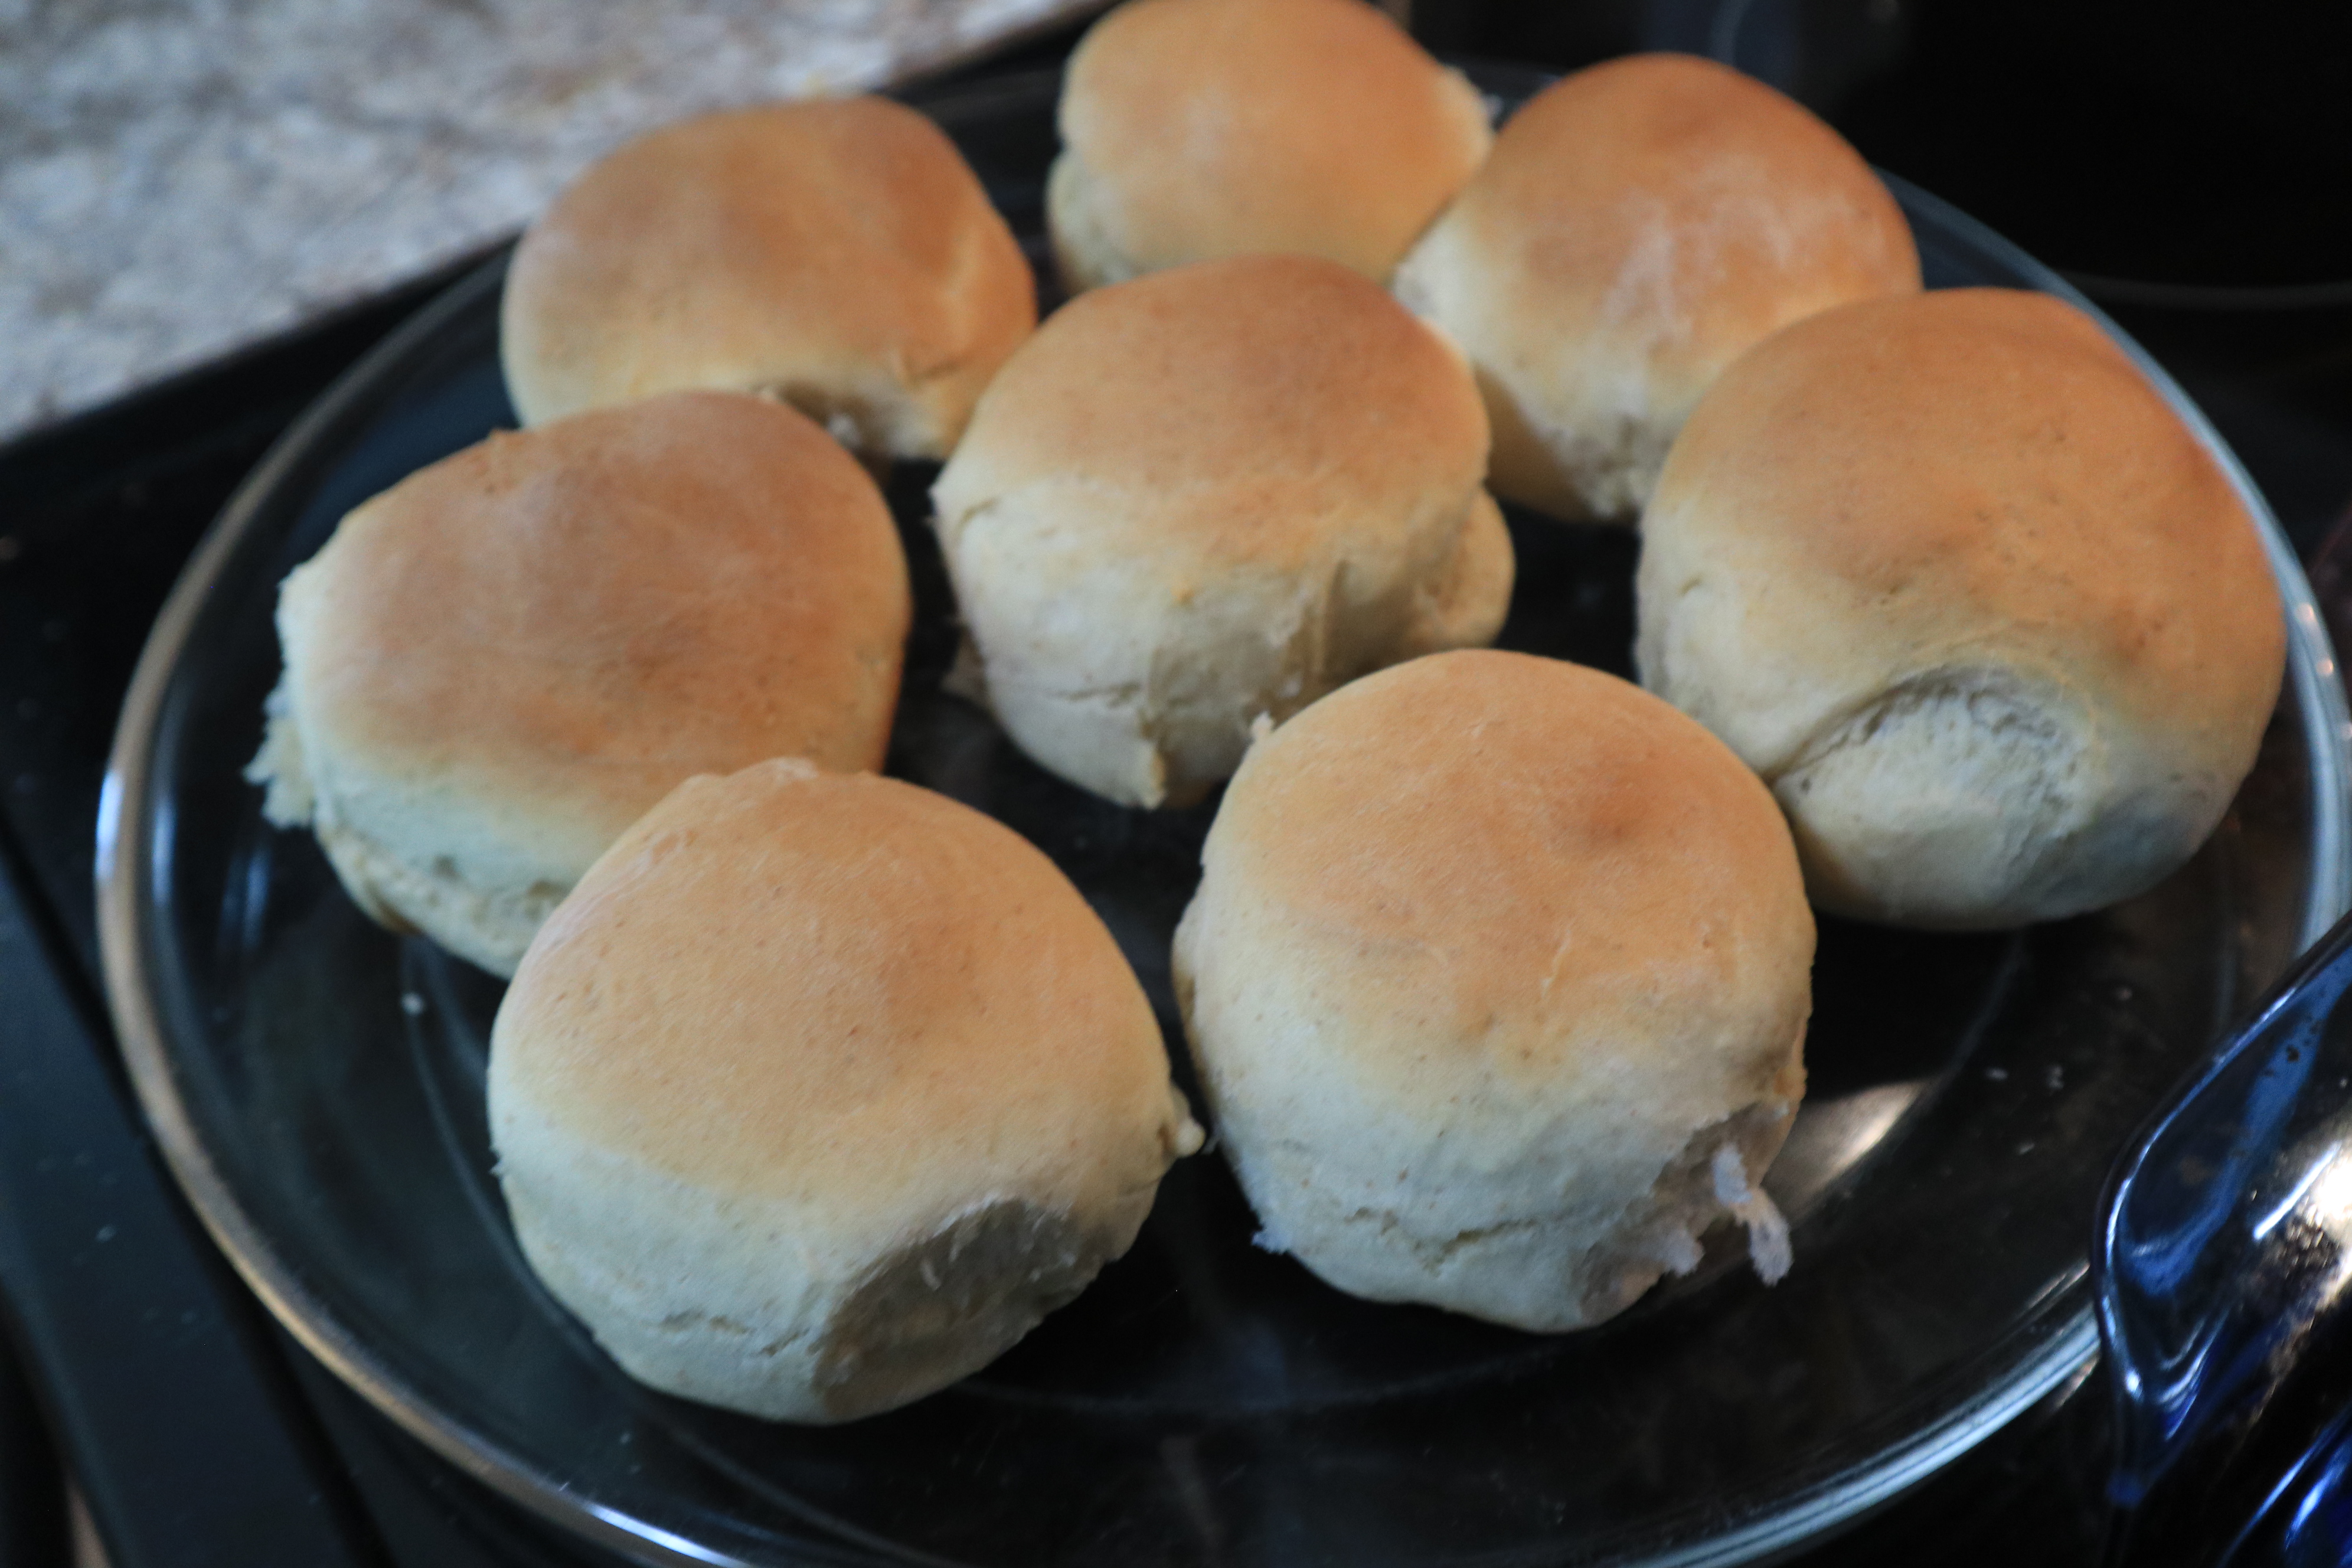 Sourdough Discard Rolls – How to make them, not toss the discard